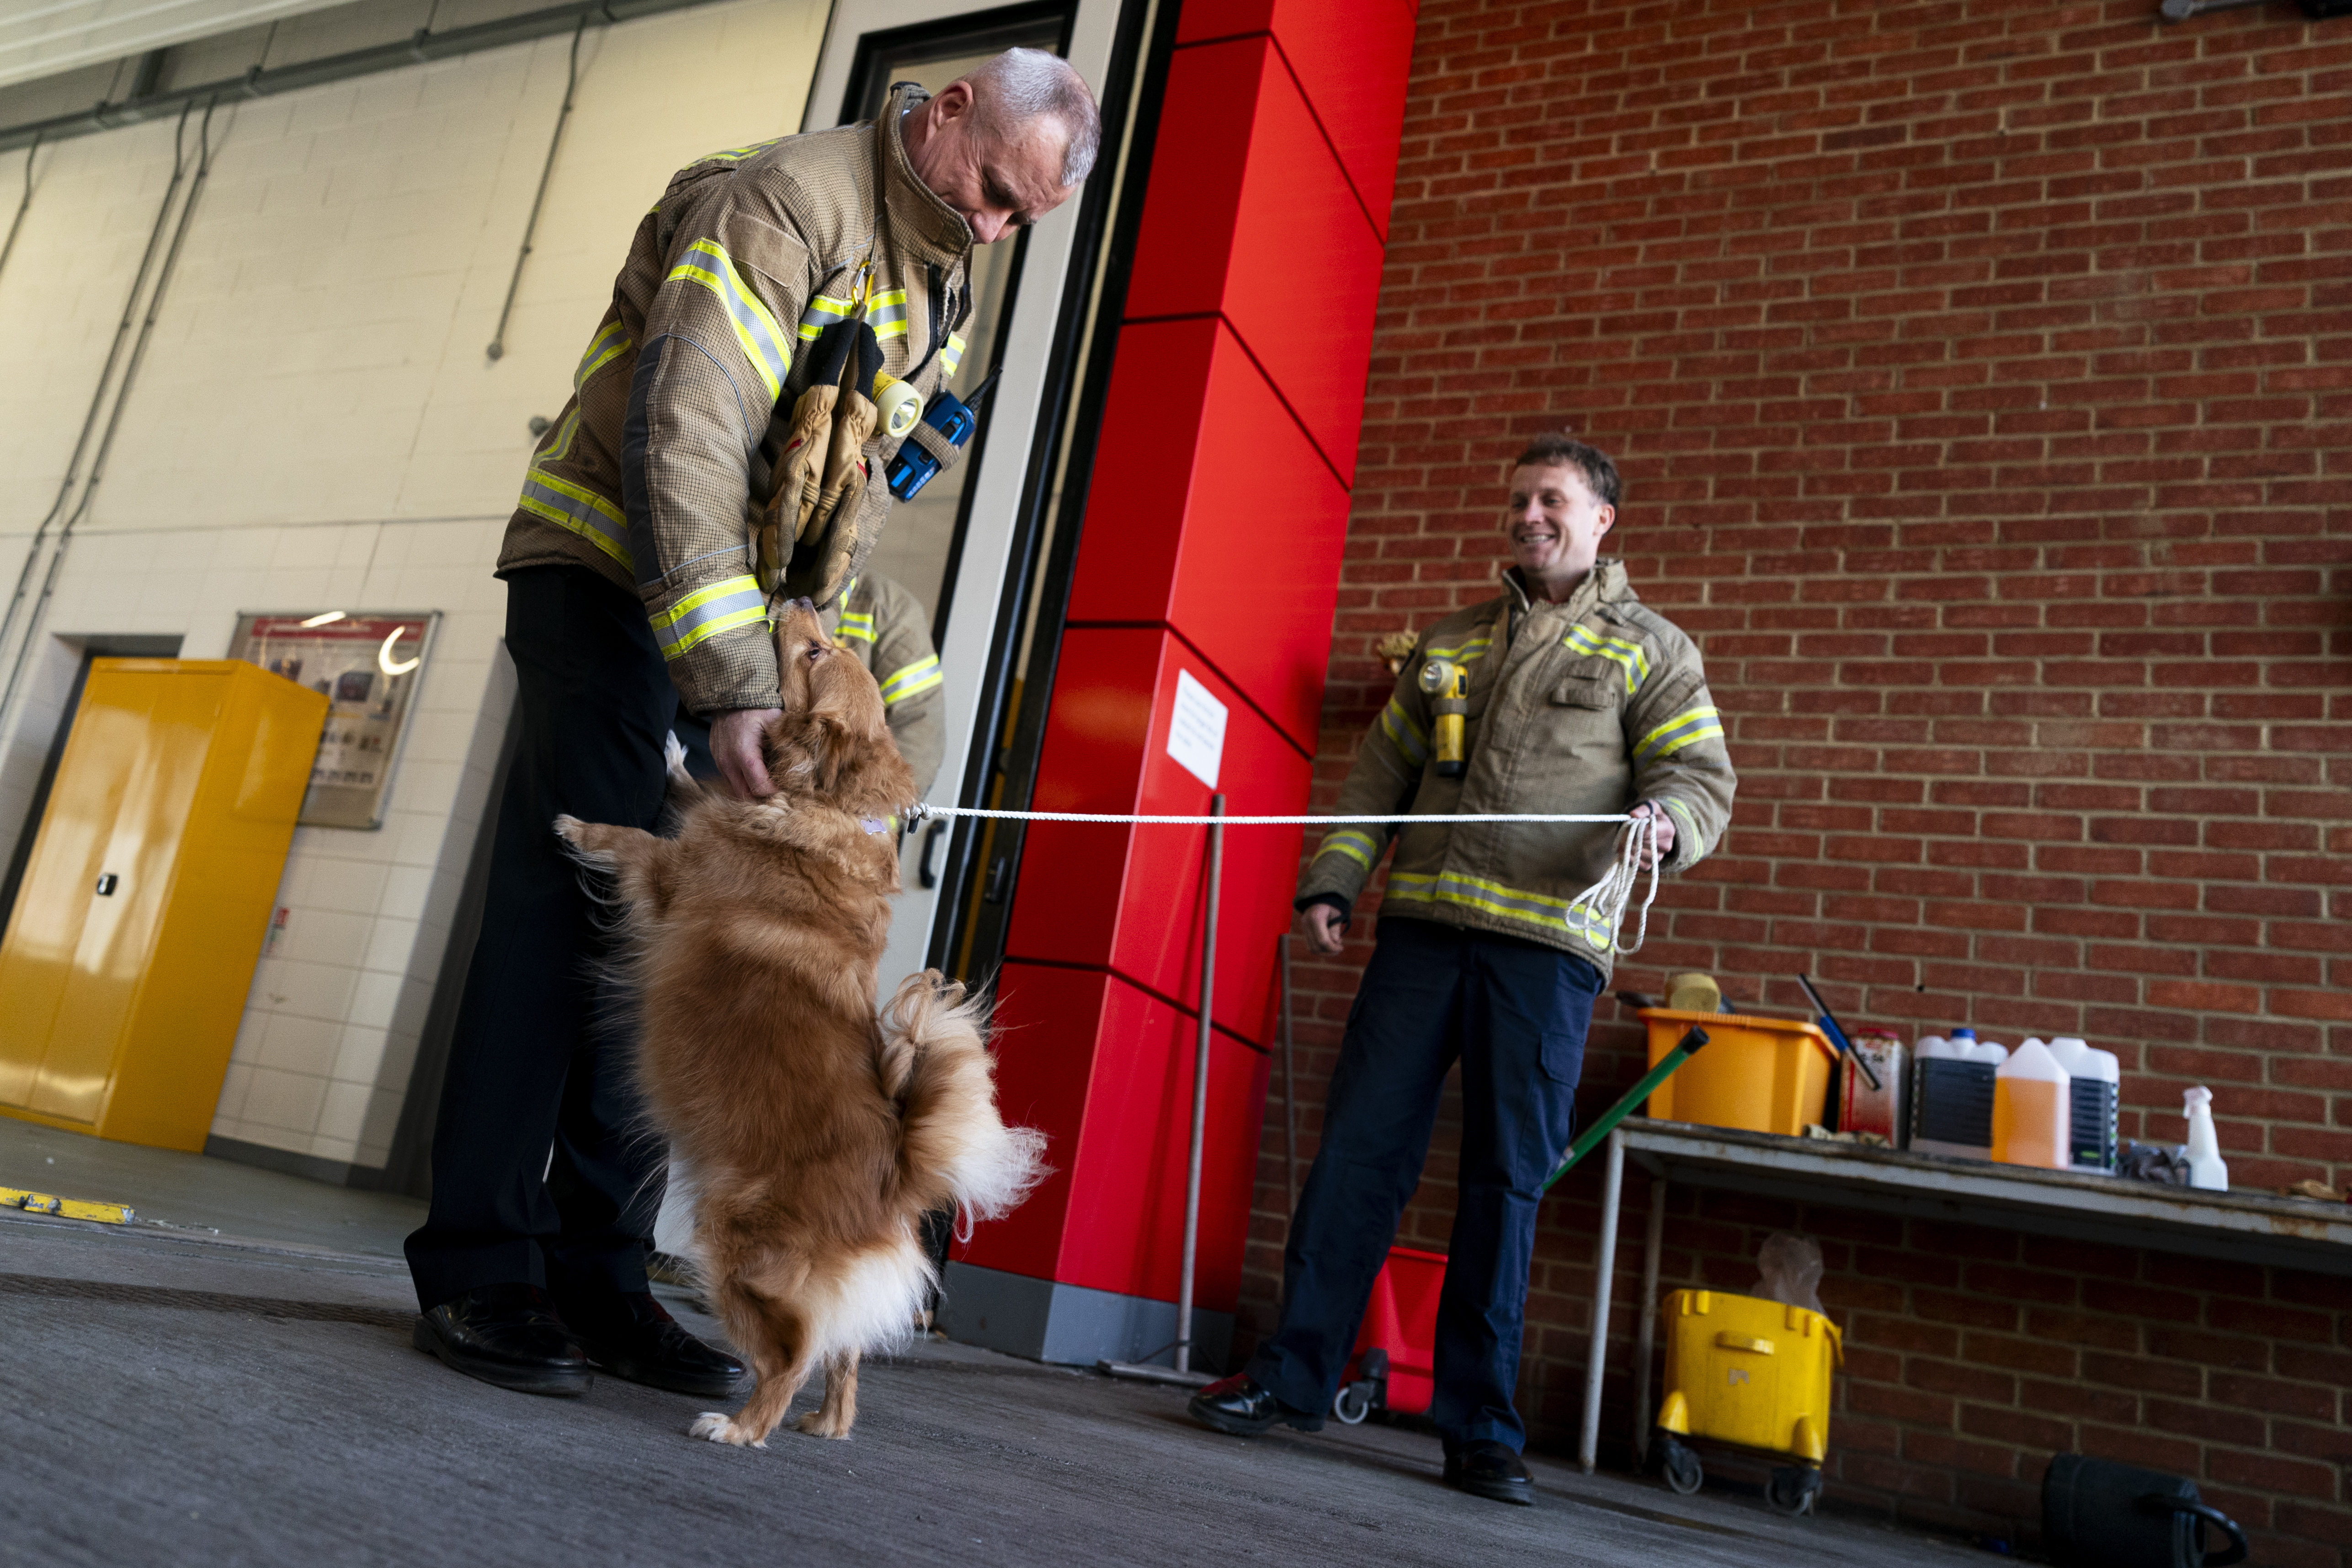 Firefighters with dog 